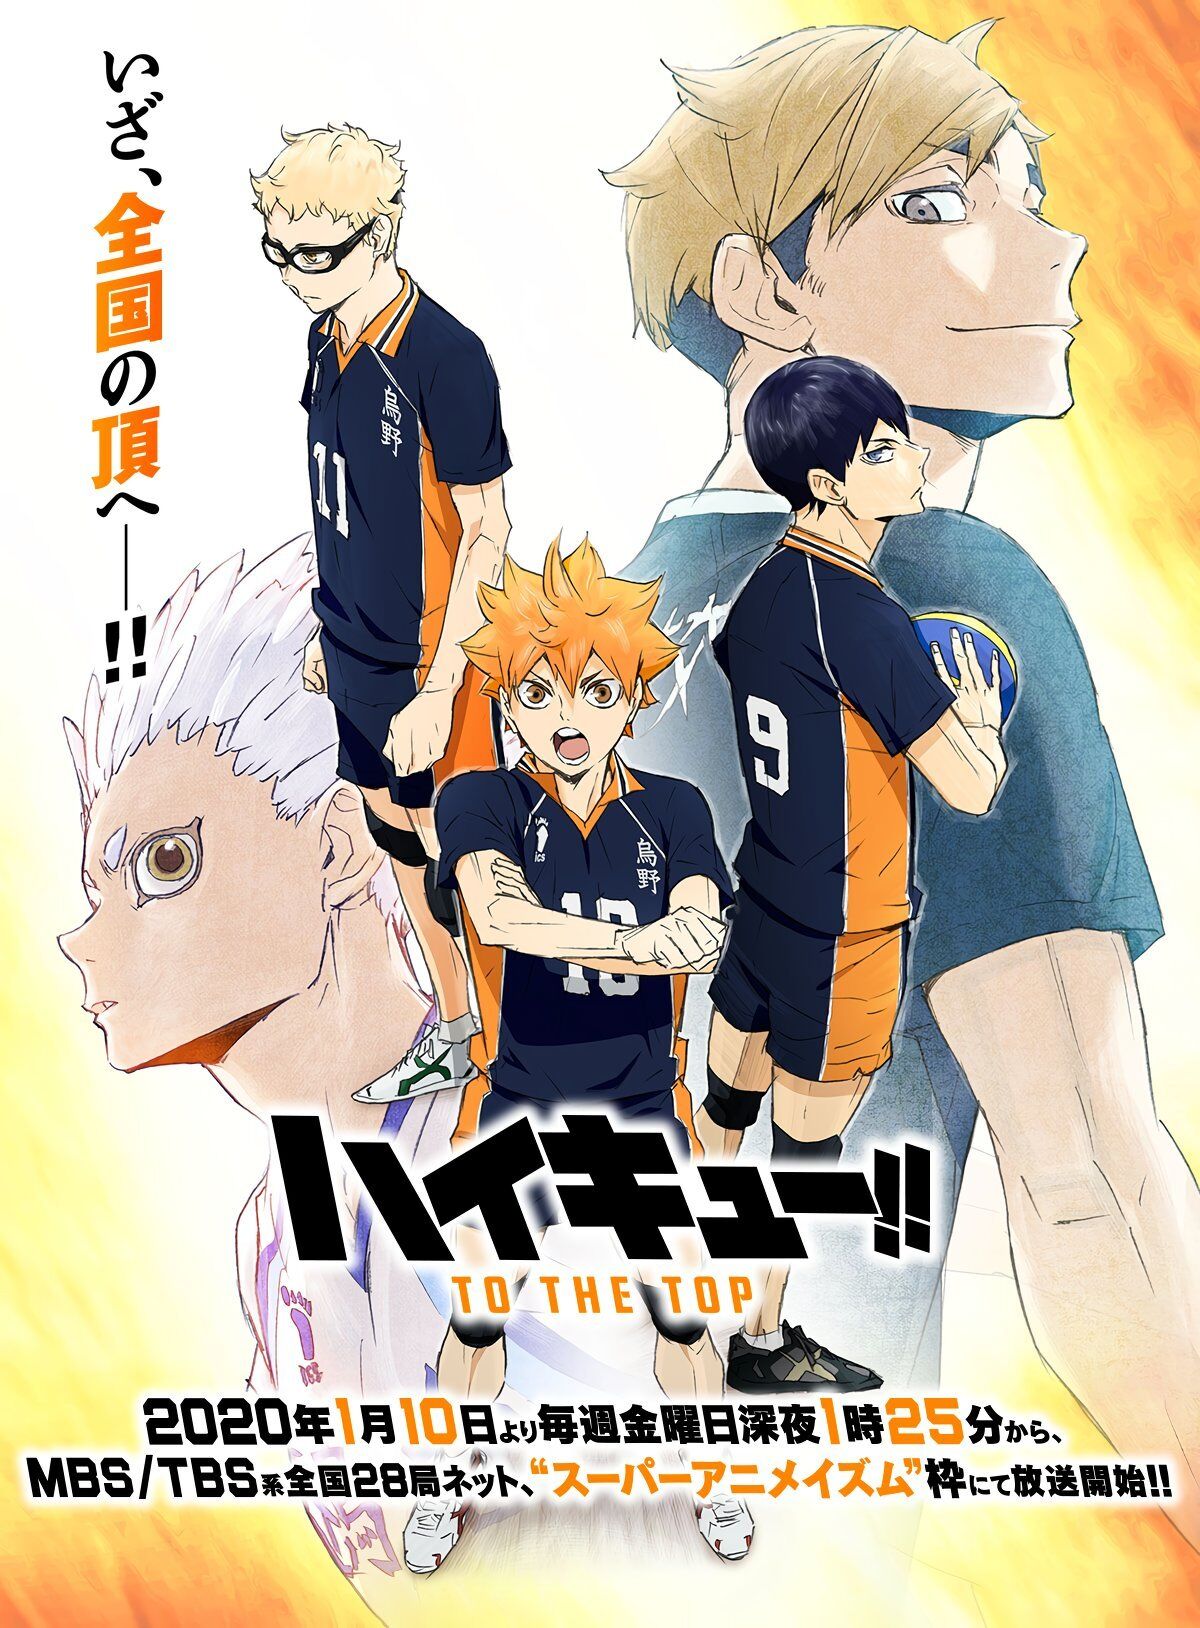 Haikyuu - Hey Hey Hey - NEW Haikyuu!! Season 4 (Haikyuu!! TO THE TOP)  second cour visual featured on the cover of Charaby TV Magazine Vol. 40  to promote the upcoming broadcast!